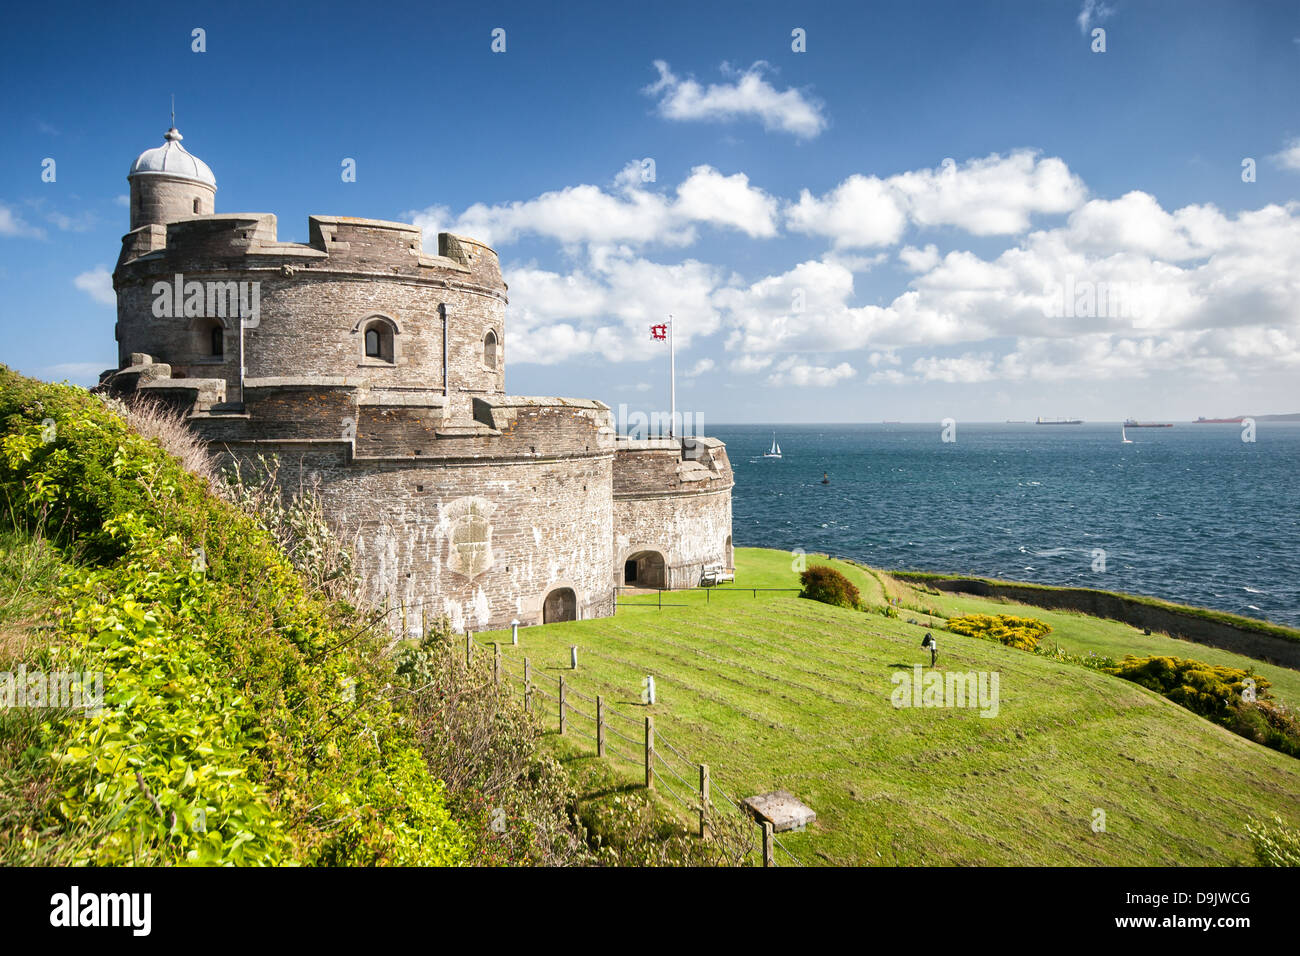 St Mawes Castle on the River Fal estuary near Falmouth Cornwall Stock Photo